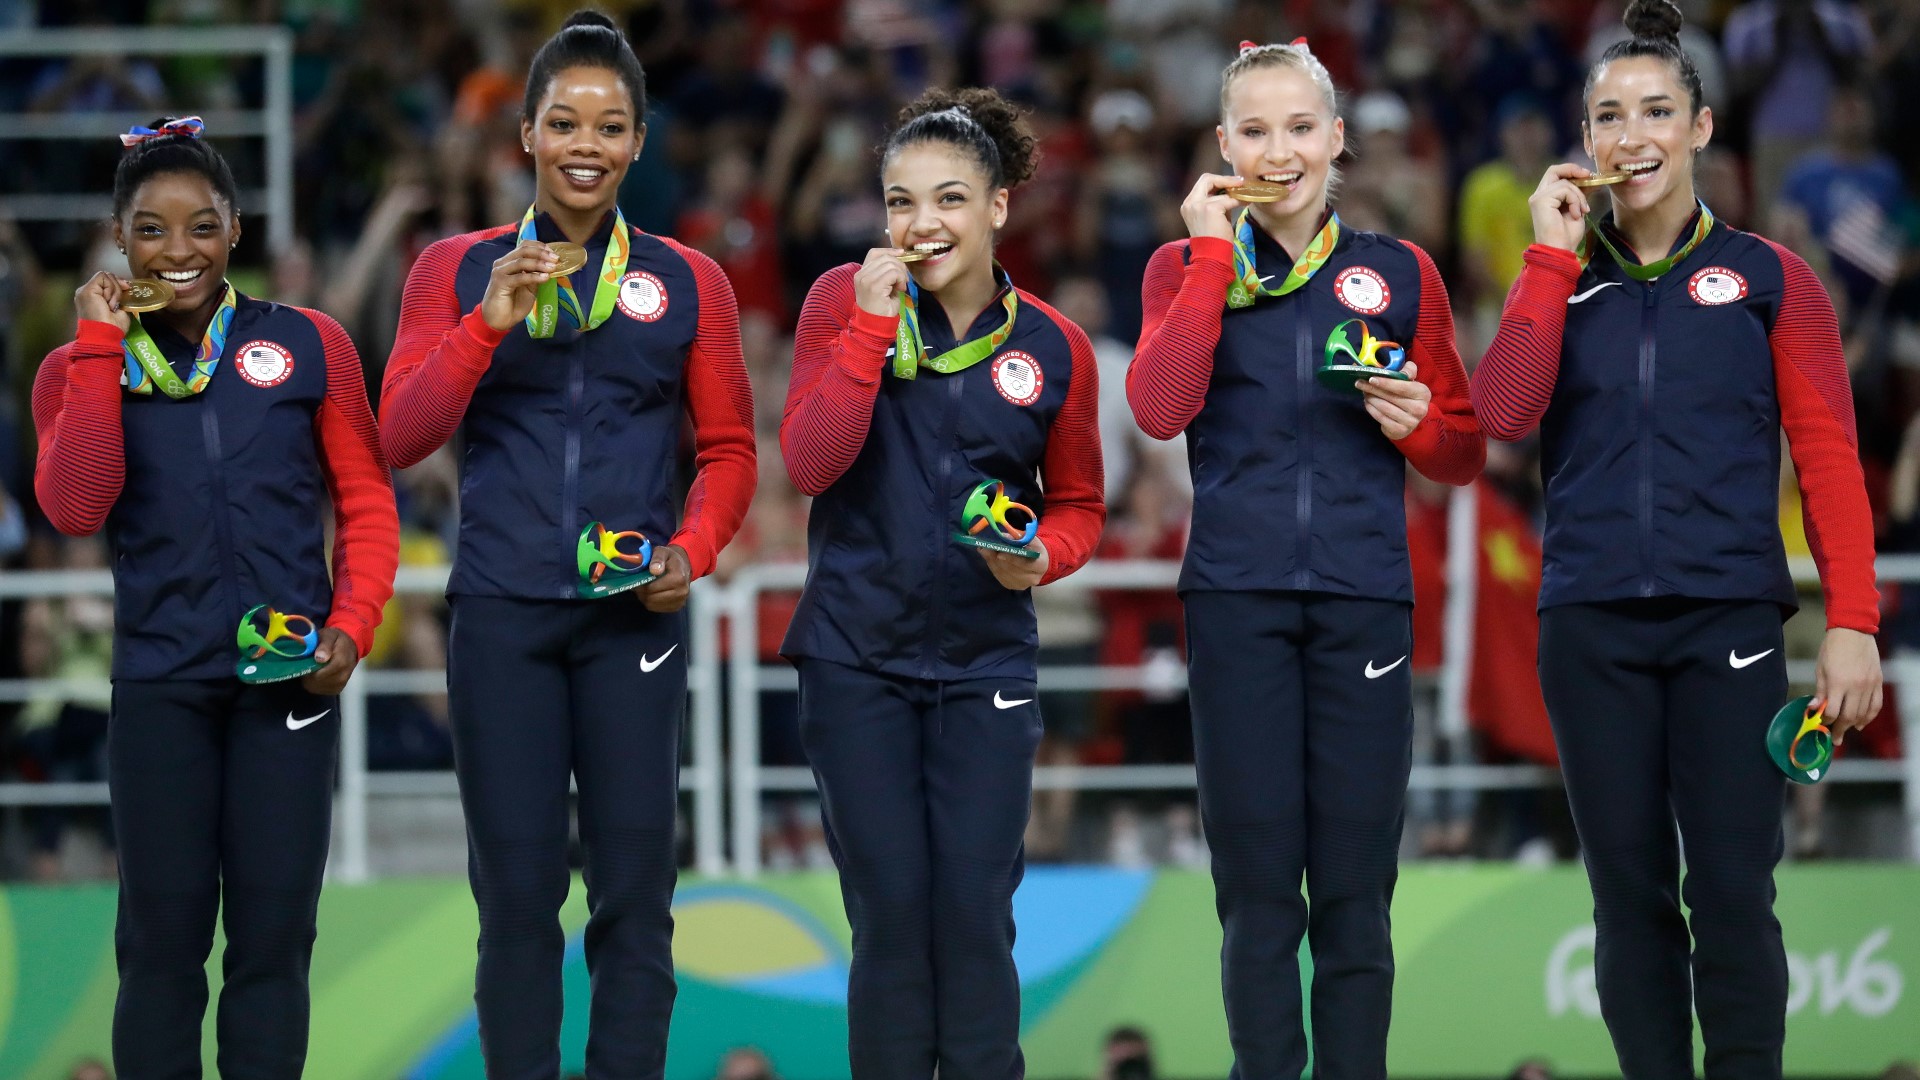 The “very significant change” to traditional medal ceremonies in the 339 events was revealed by International Olympic Committee president Thomas Bach.